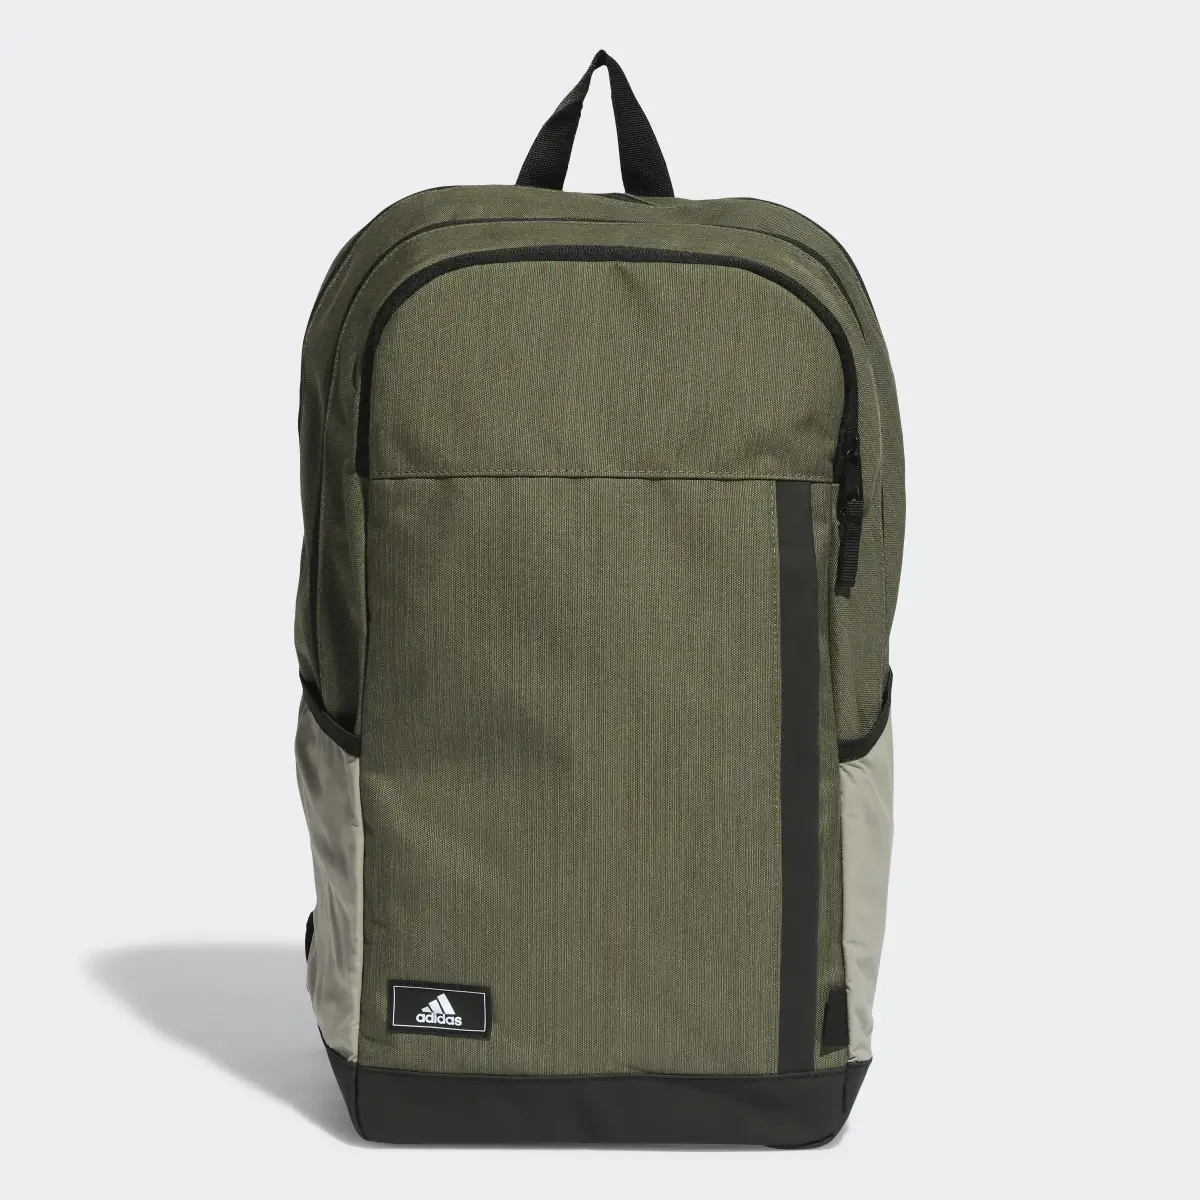 Adidas Motion Material Backpack. 1